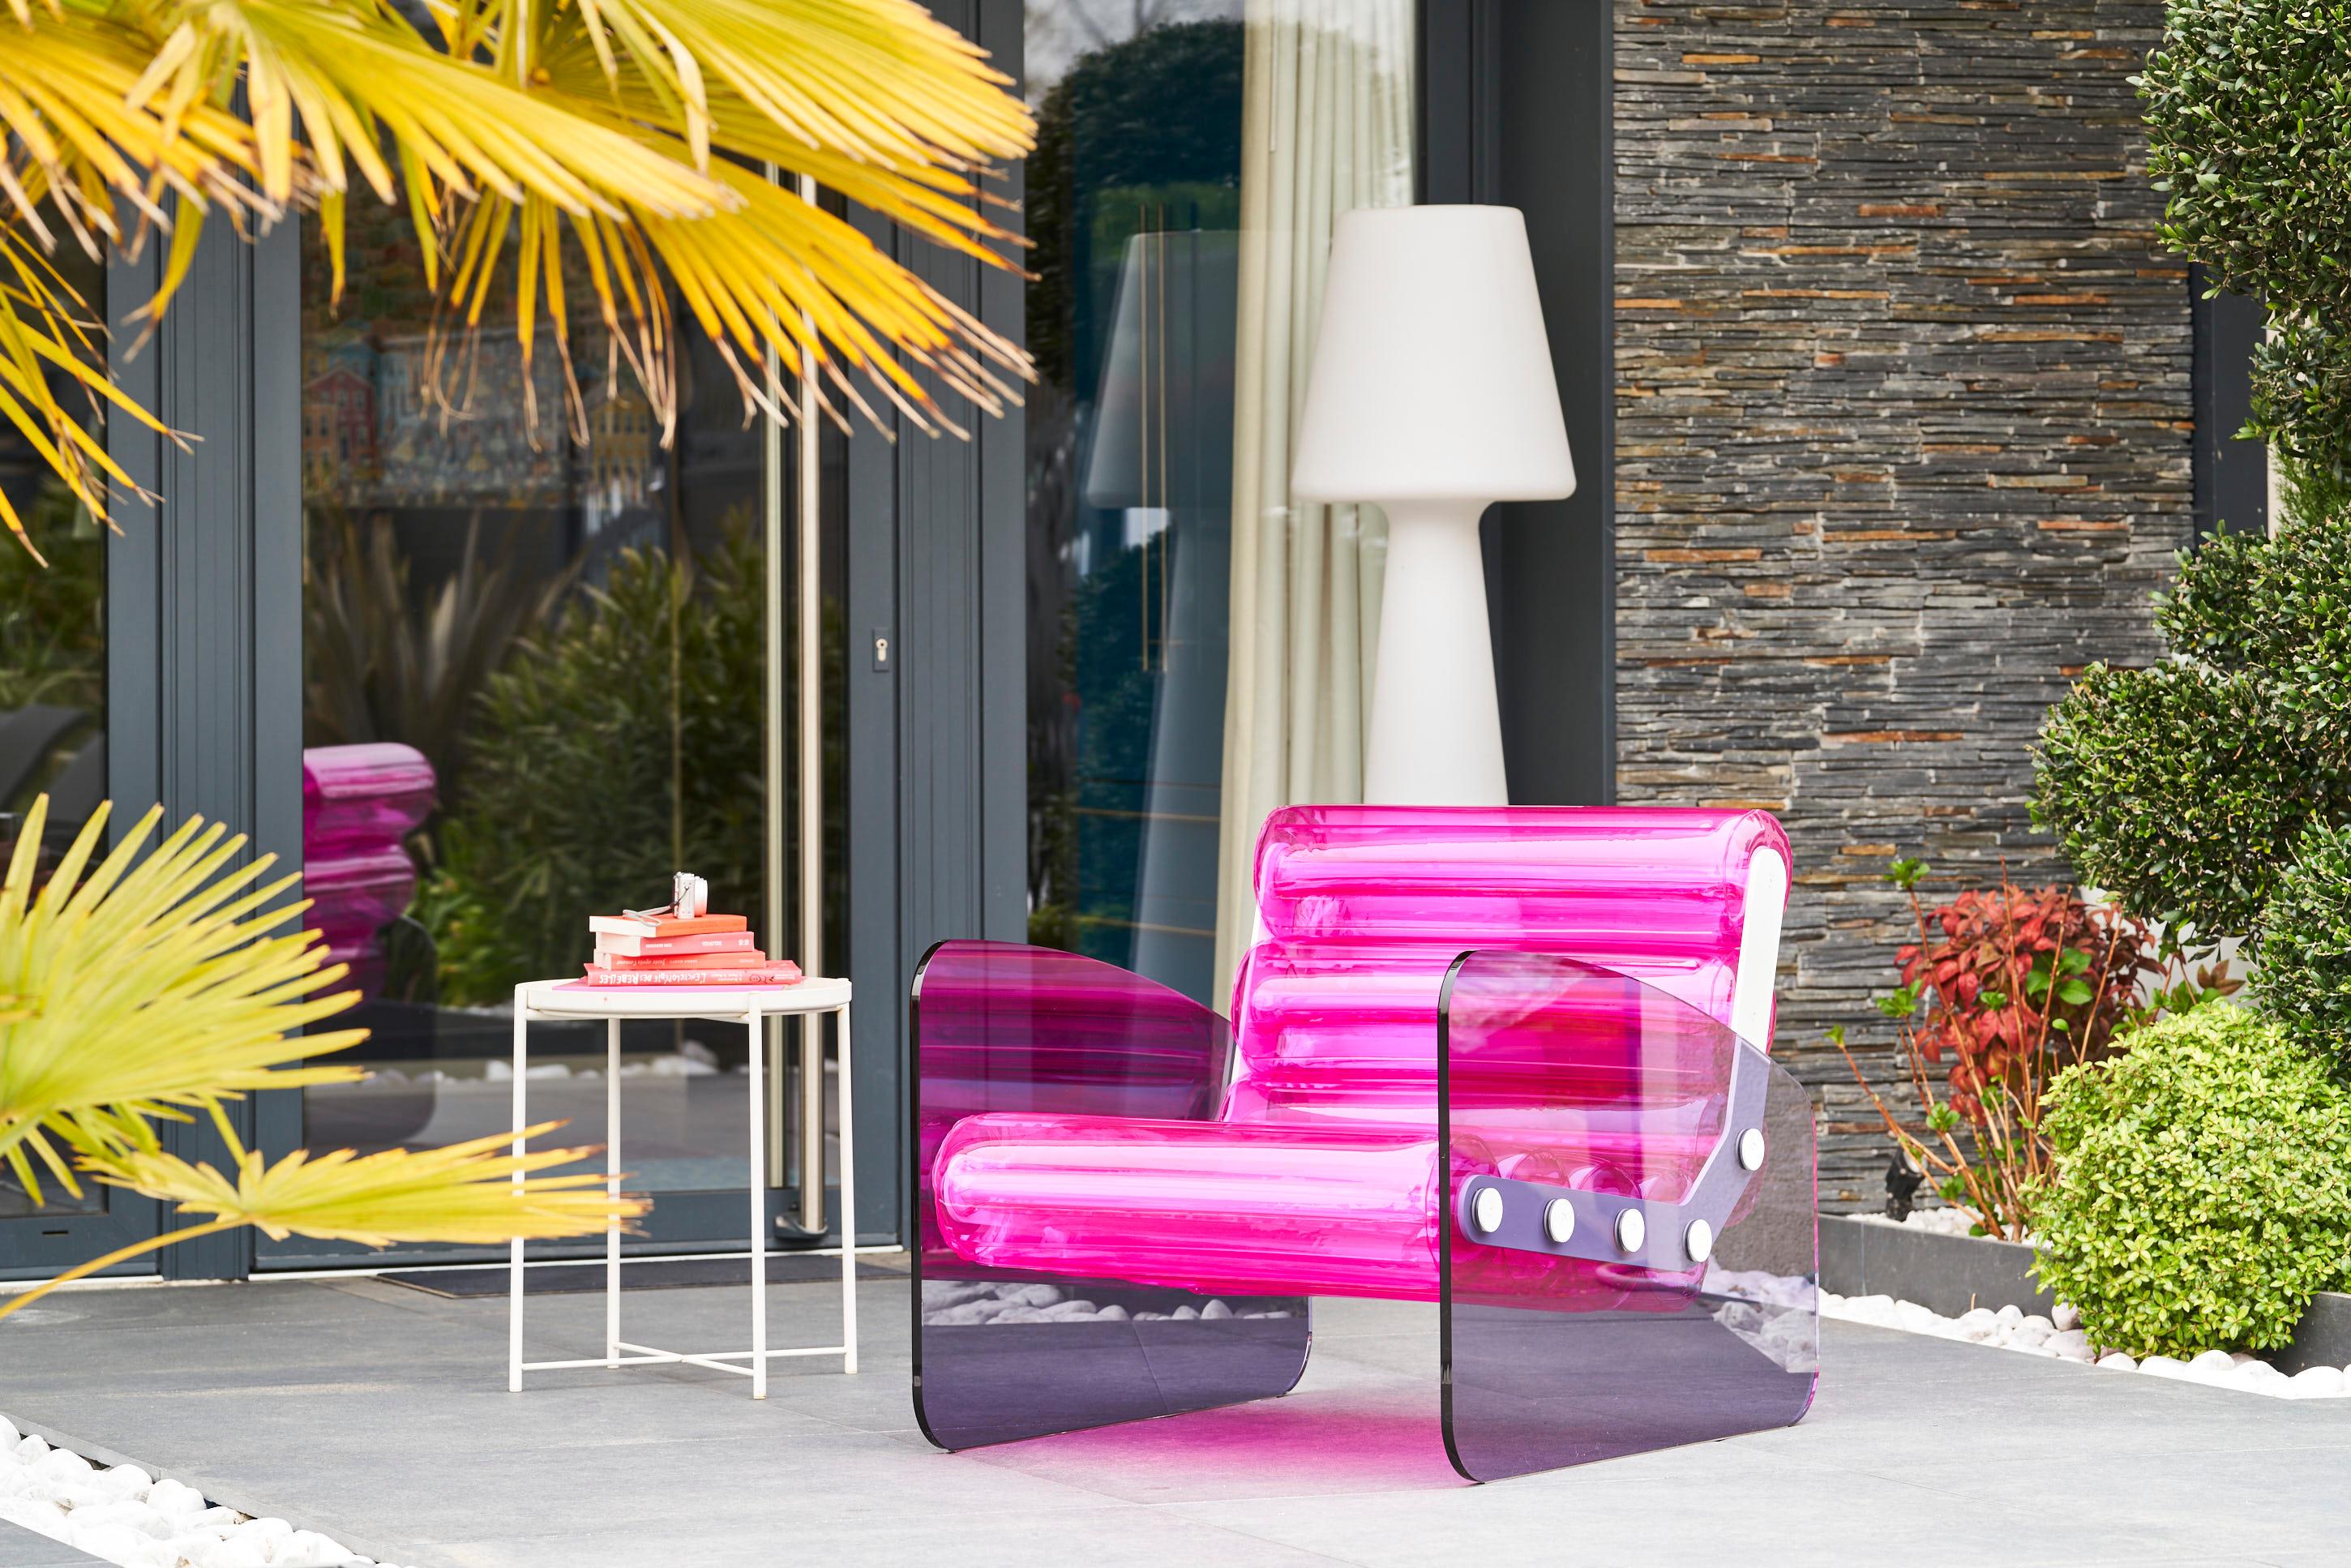 This MW03 armchair is an exceptional piece, custom-made in France. The armchair's sides are made of grey-colored acrylic glass.

Newly designed architectural shapes, surprising and inviting, dedicated to a lounge lifestyle. The lines are stylized,